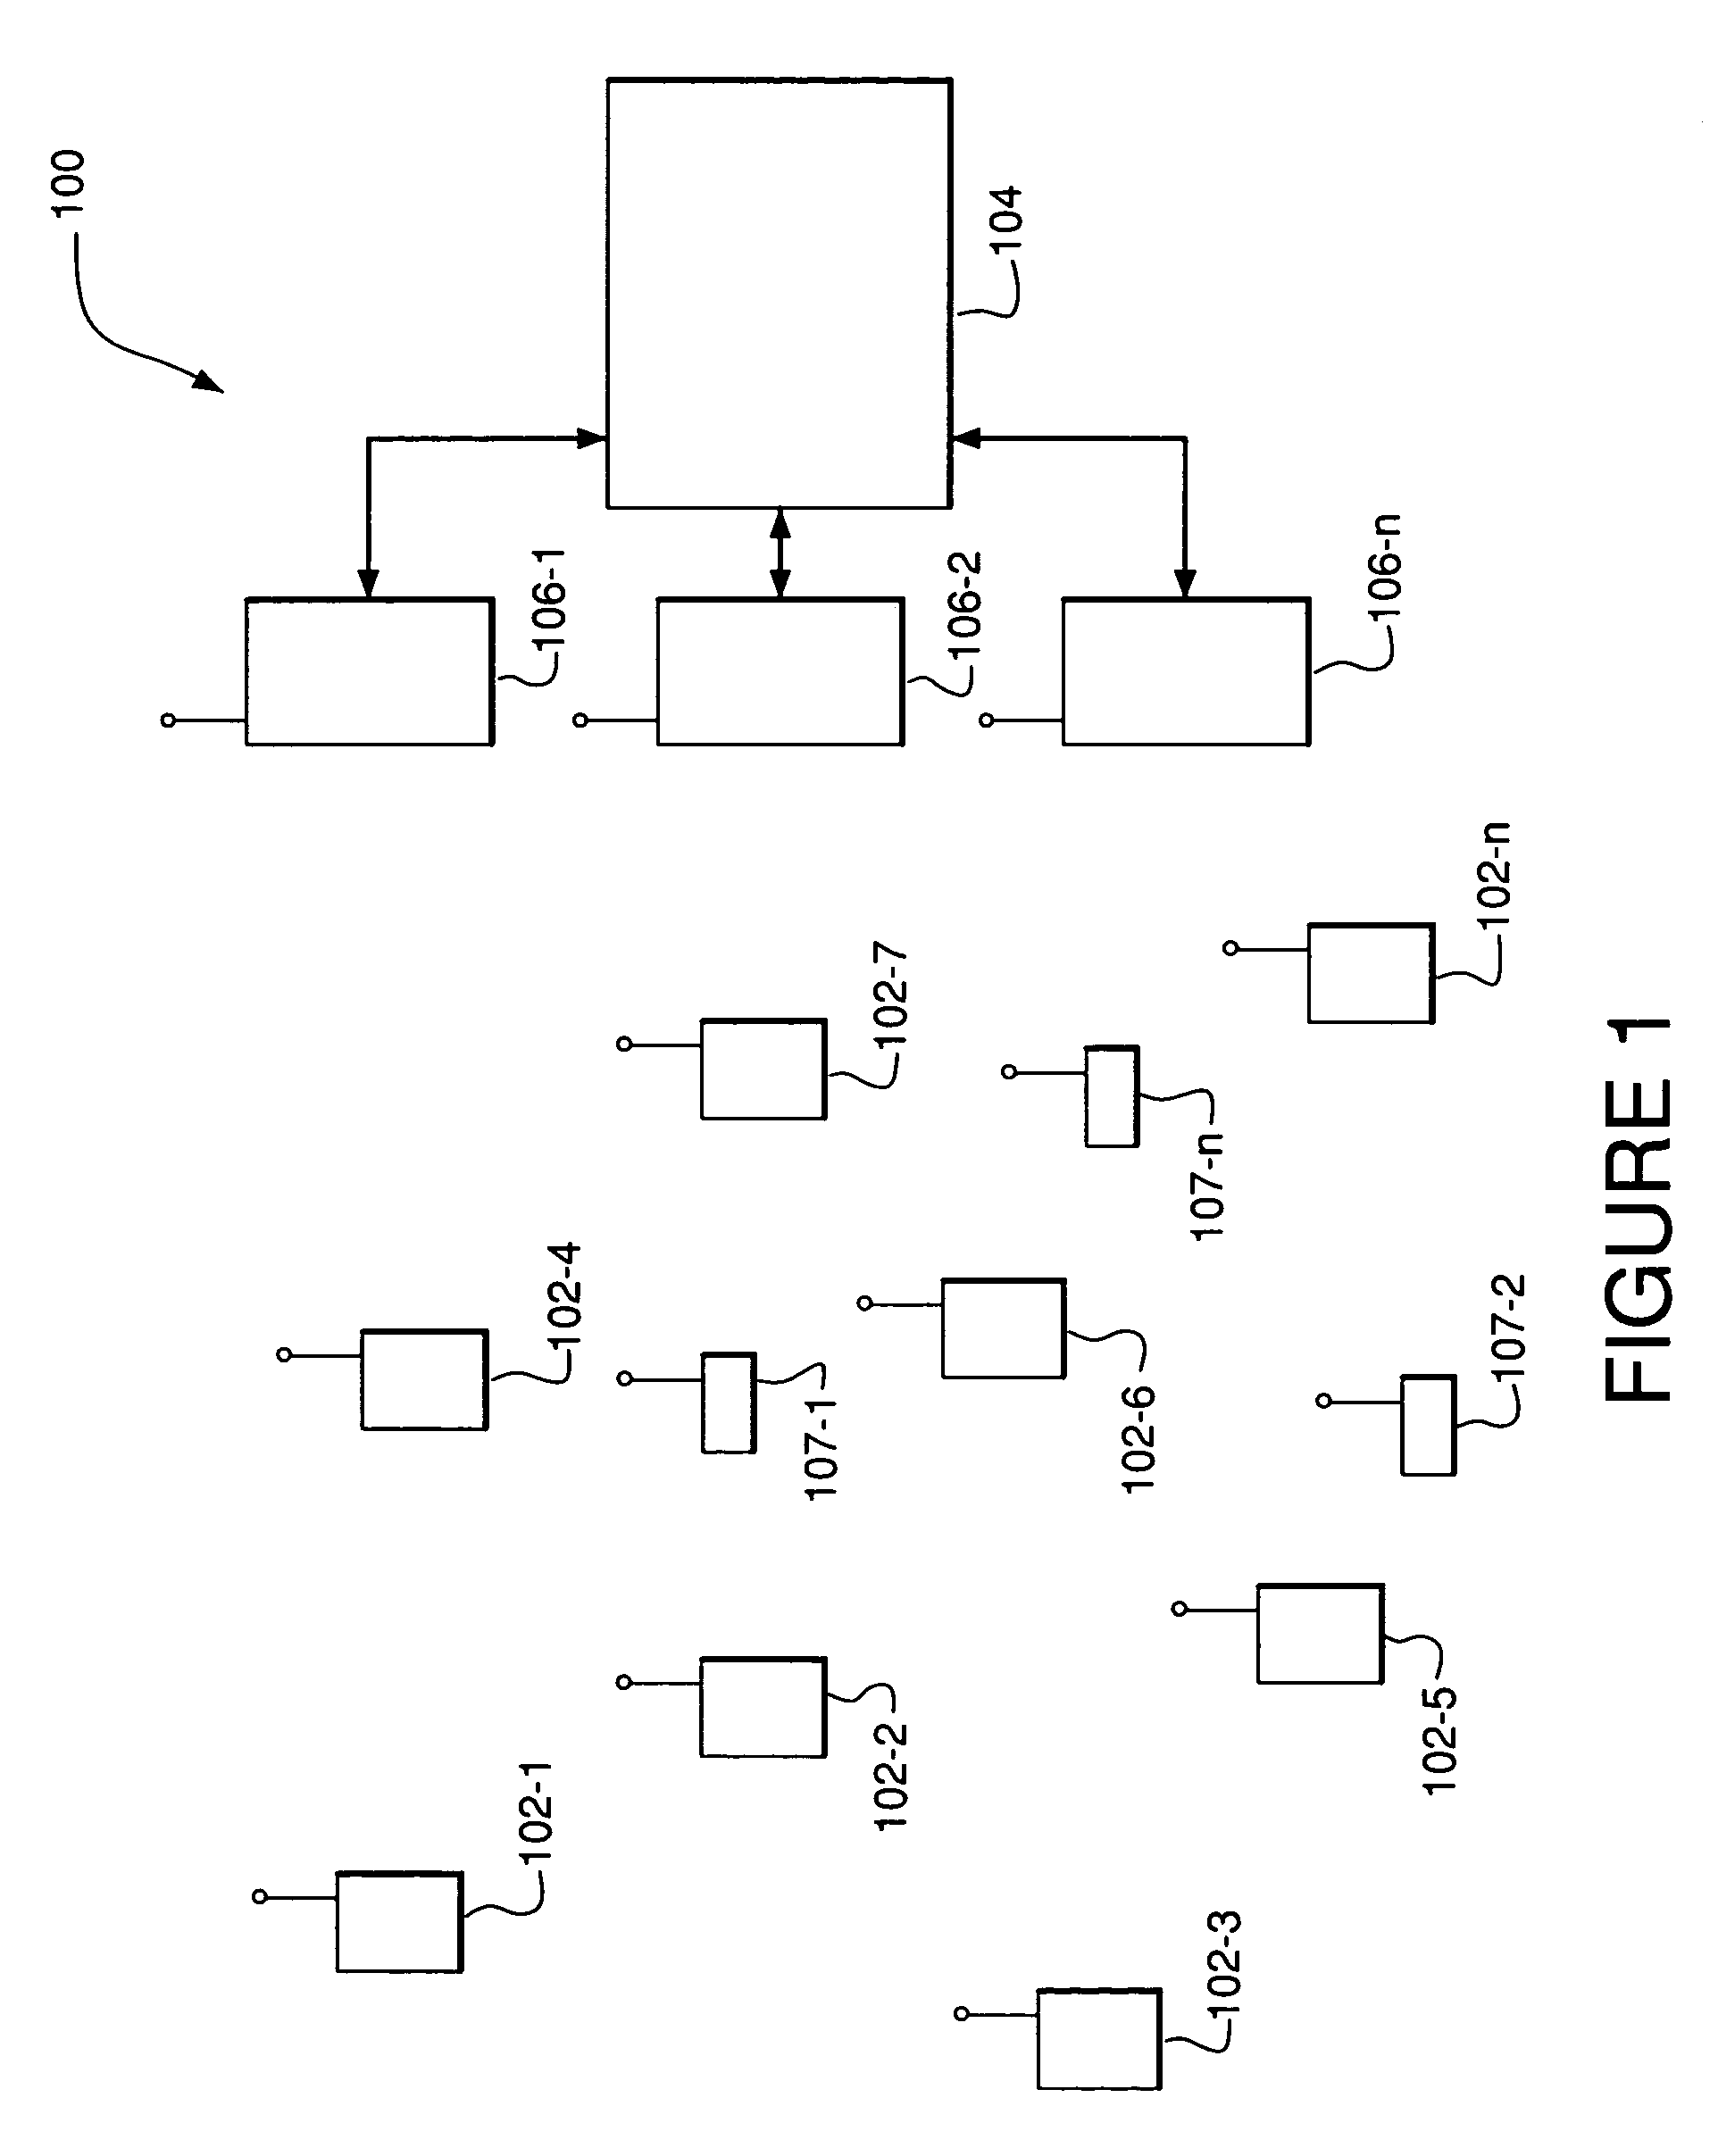 System and method for using an ad-hoc routing algorithm based on activity detection in an ad-hoc network